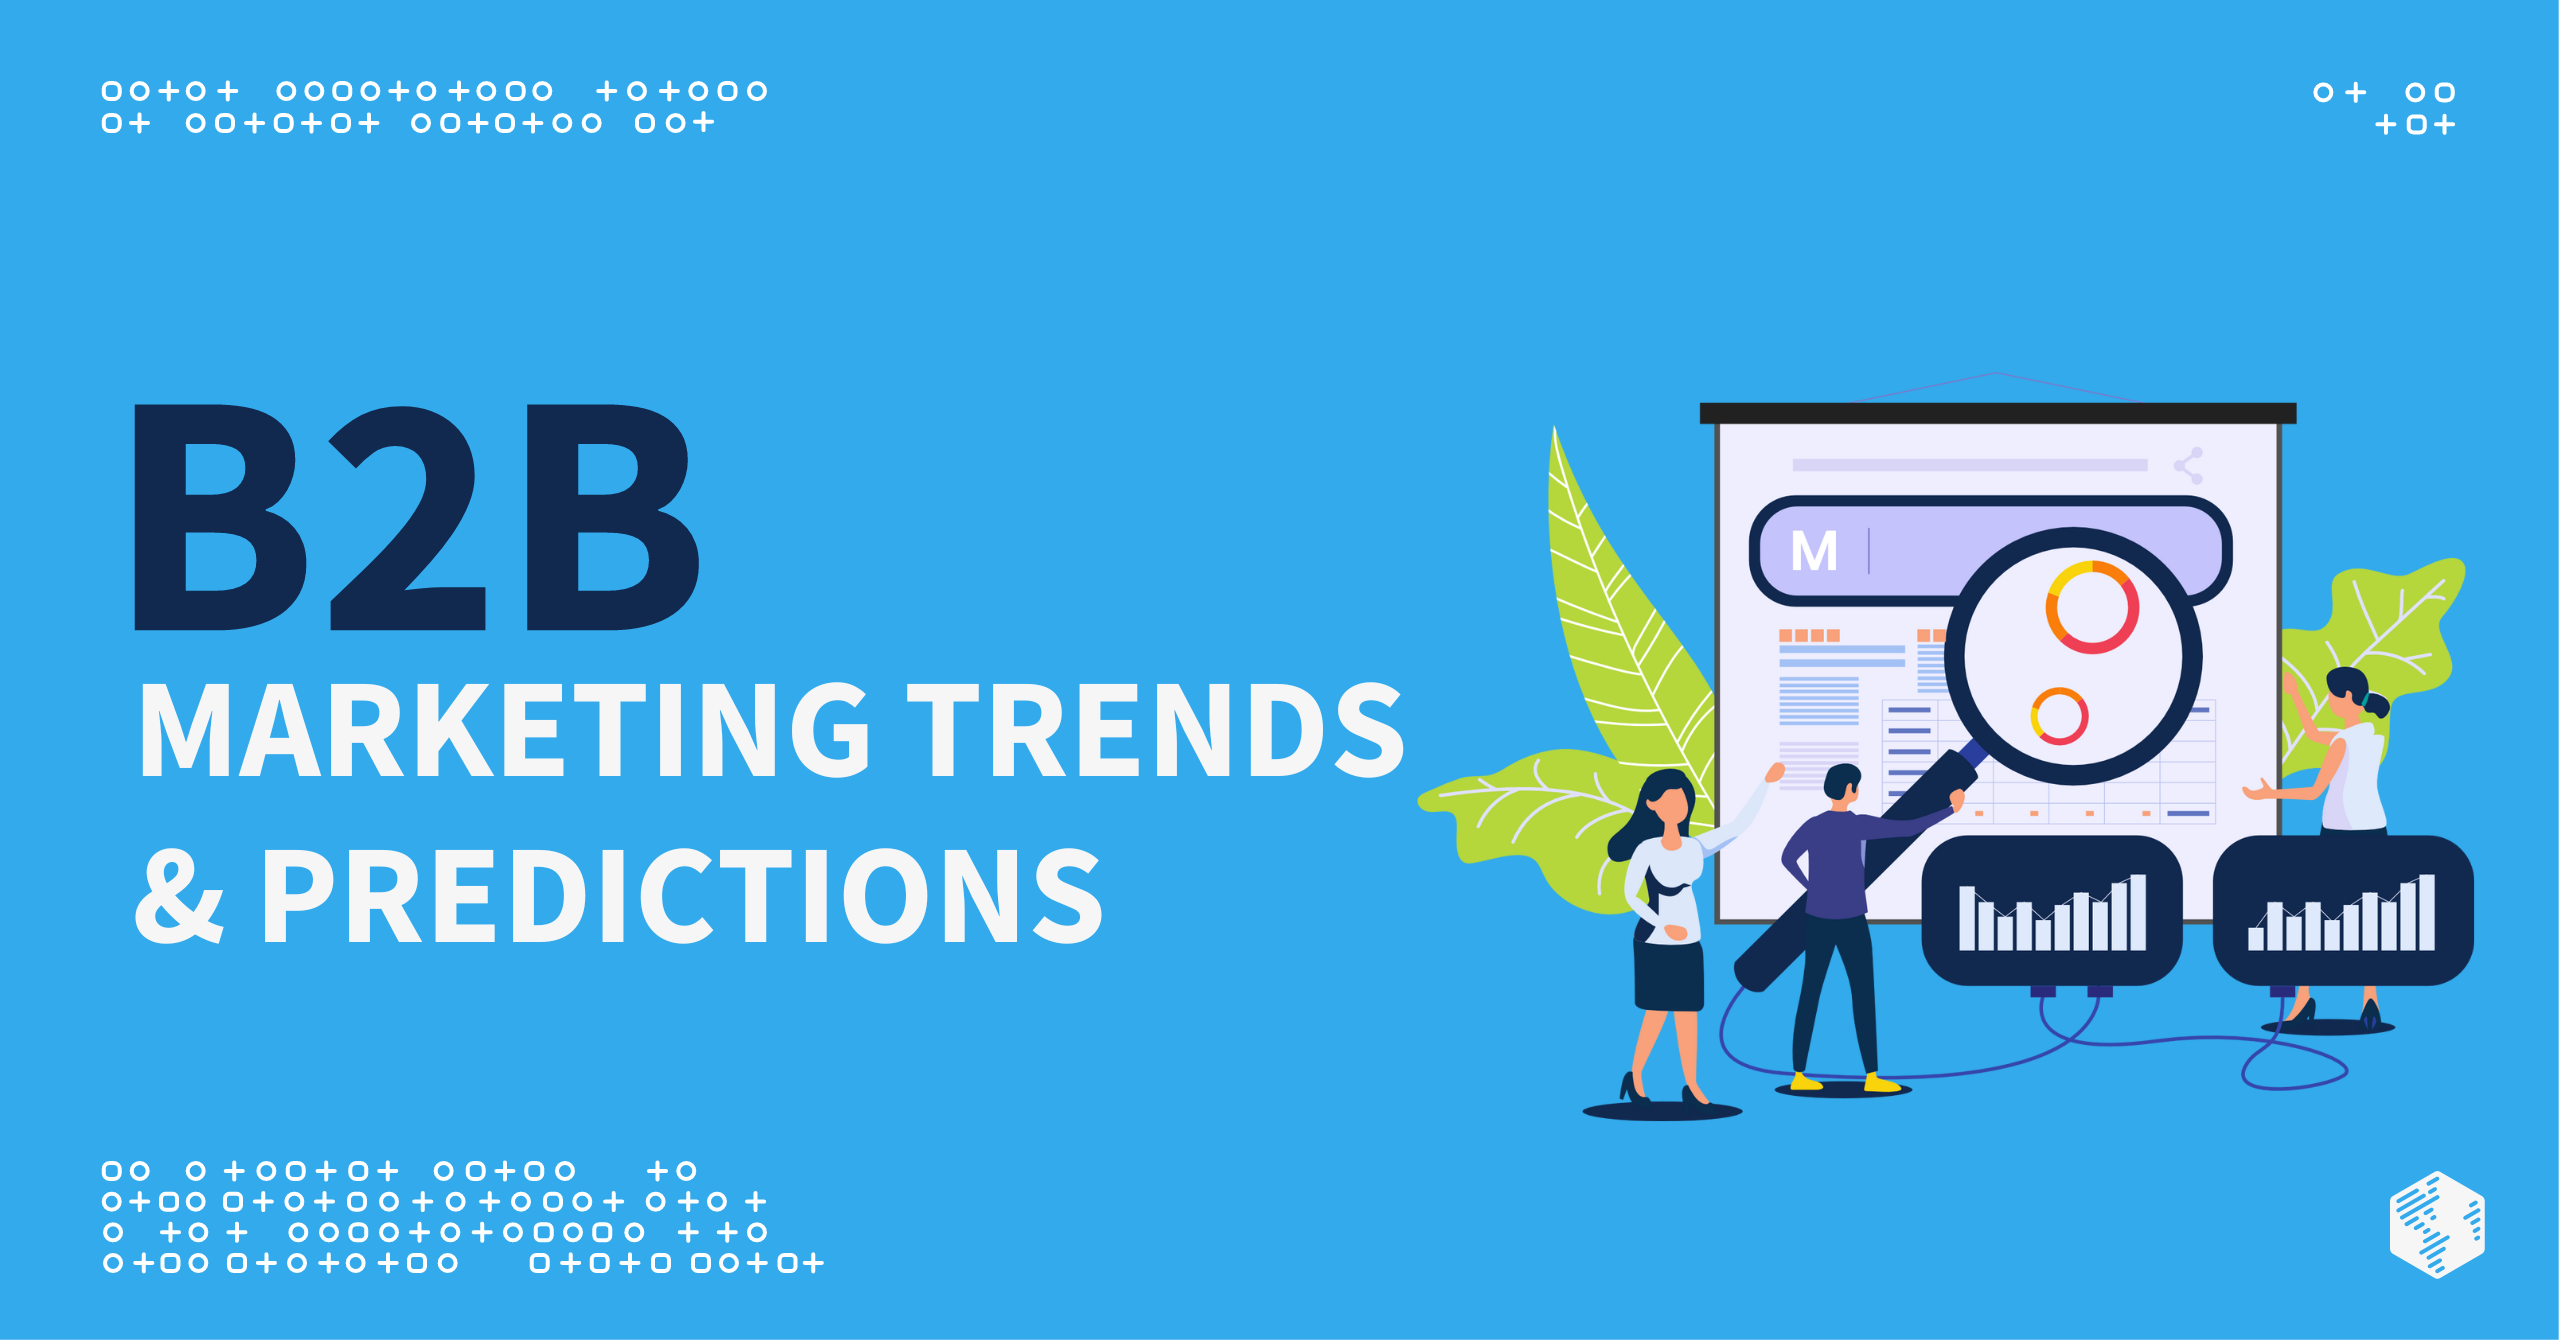 B2B Marketing Trends to Prepare for in 2023